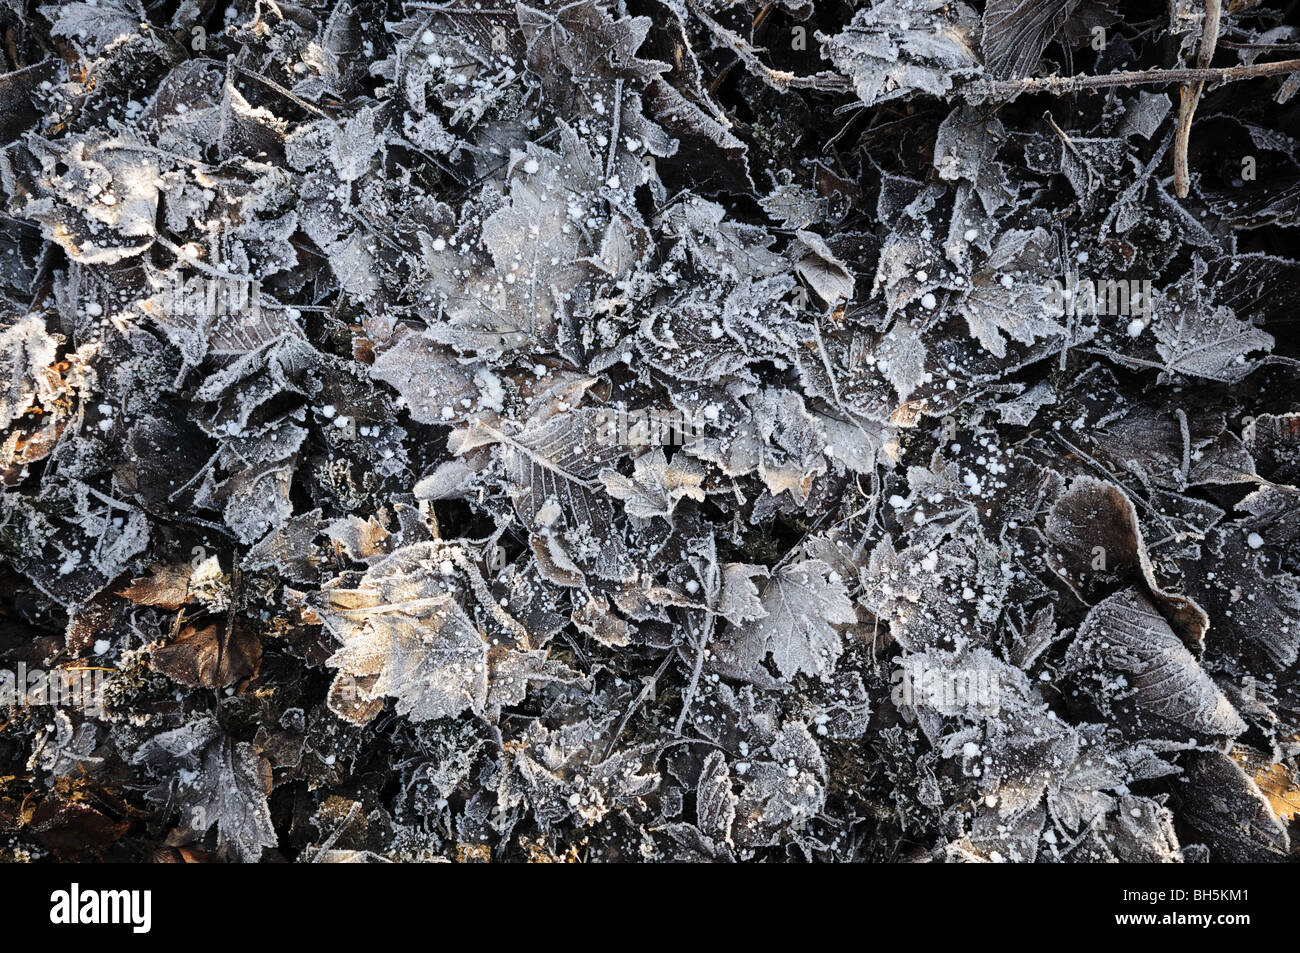 Leaf litter covered in ice with dappled sunlight Stock Photo